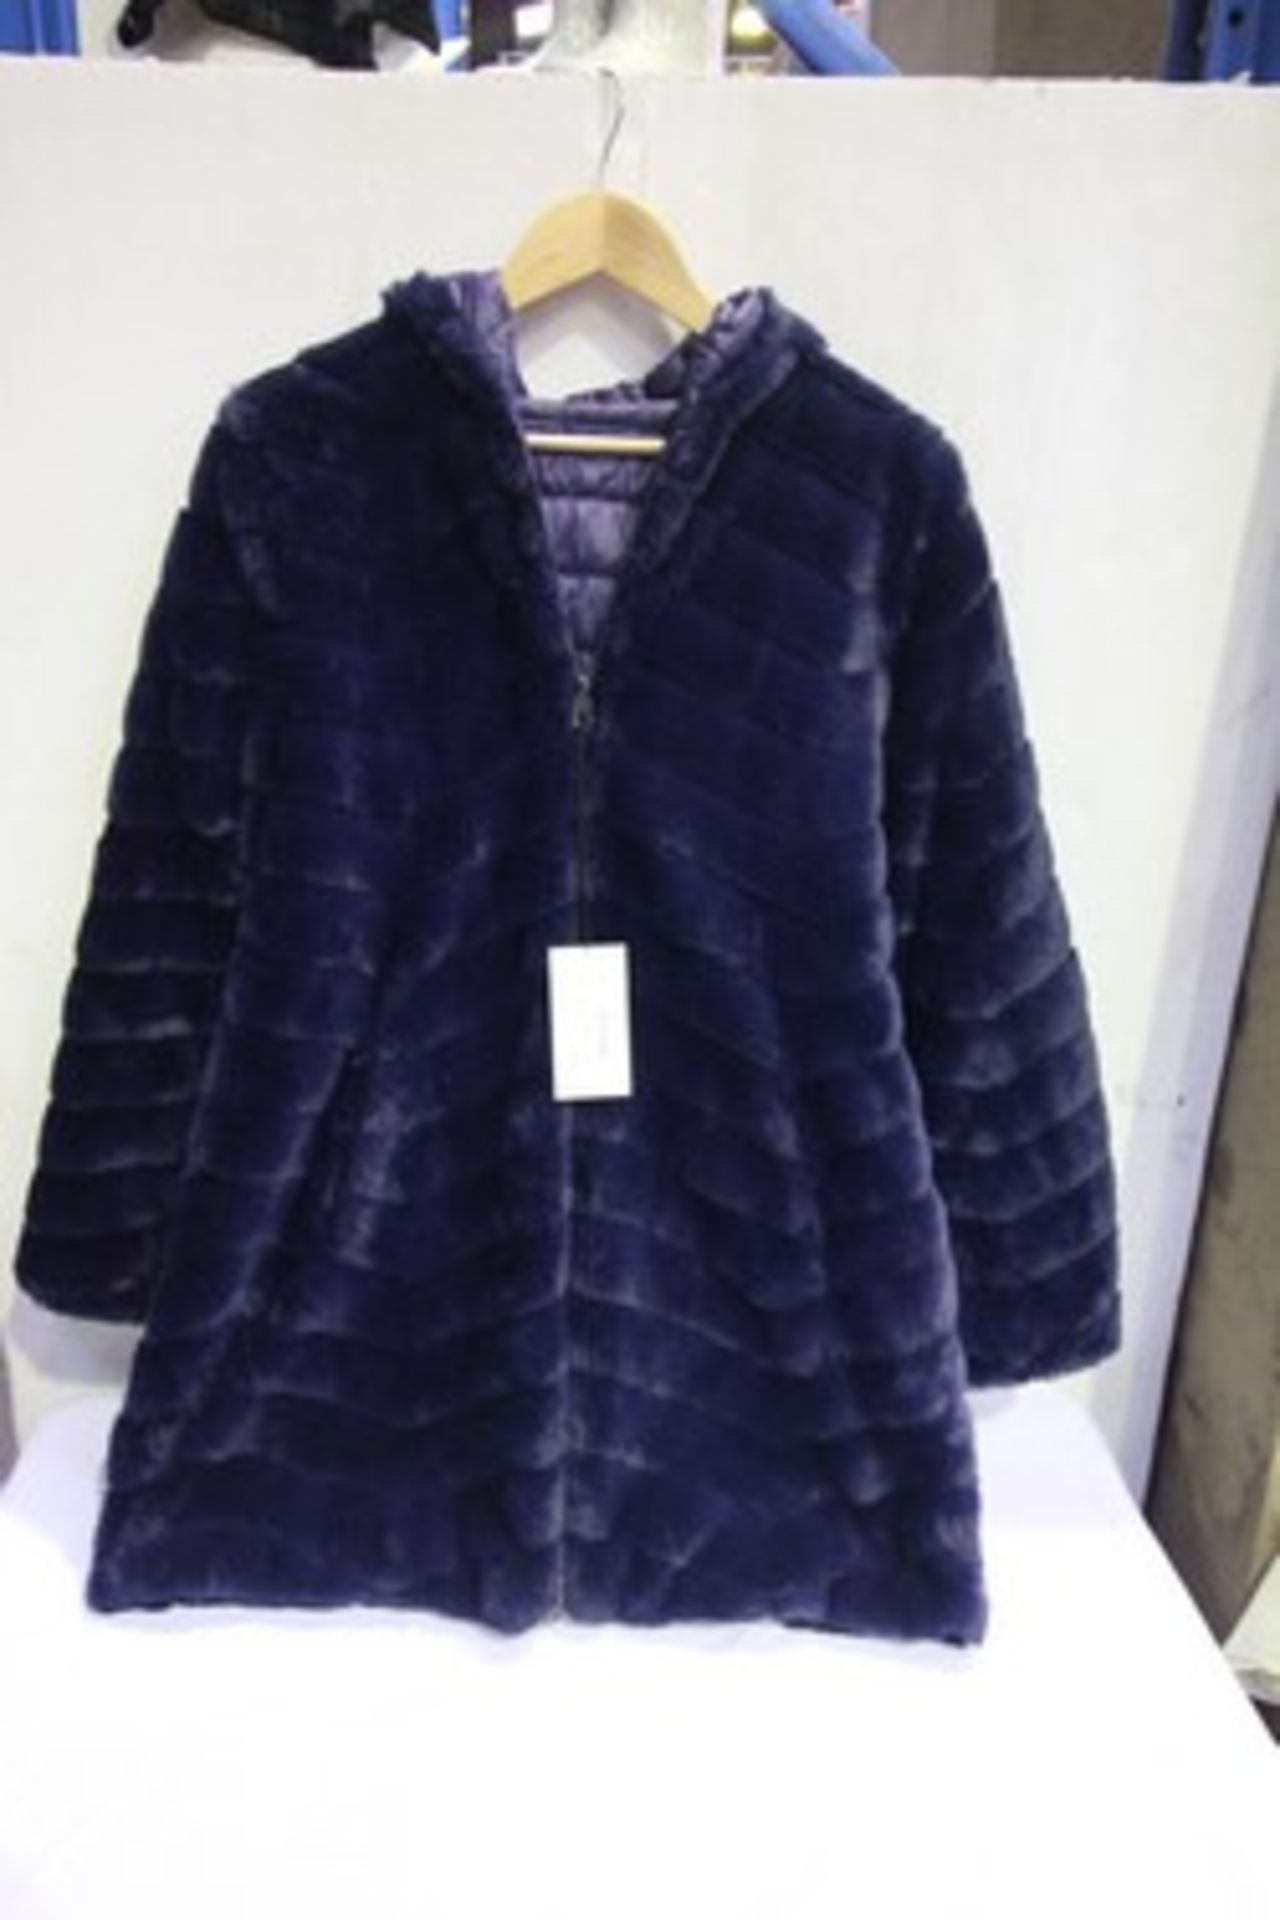 1 x Lakeland navy reversible faux fur coat, size M/12 - New with tags (E1B)